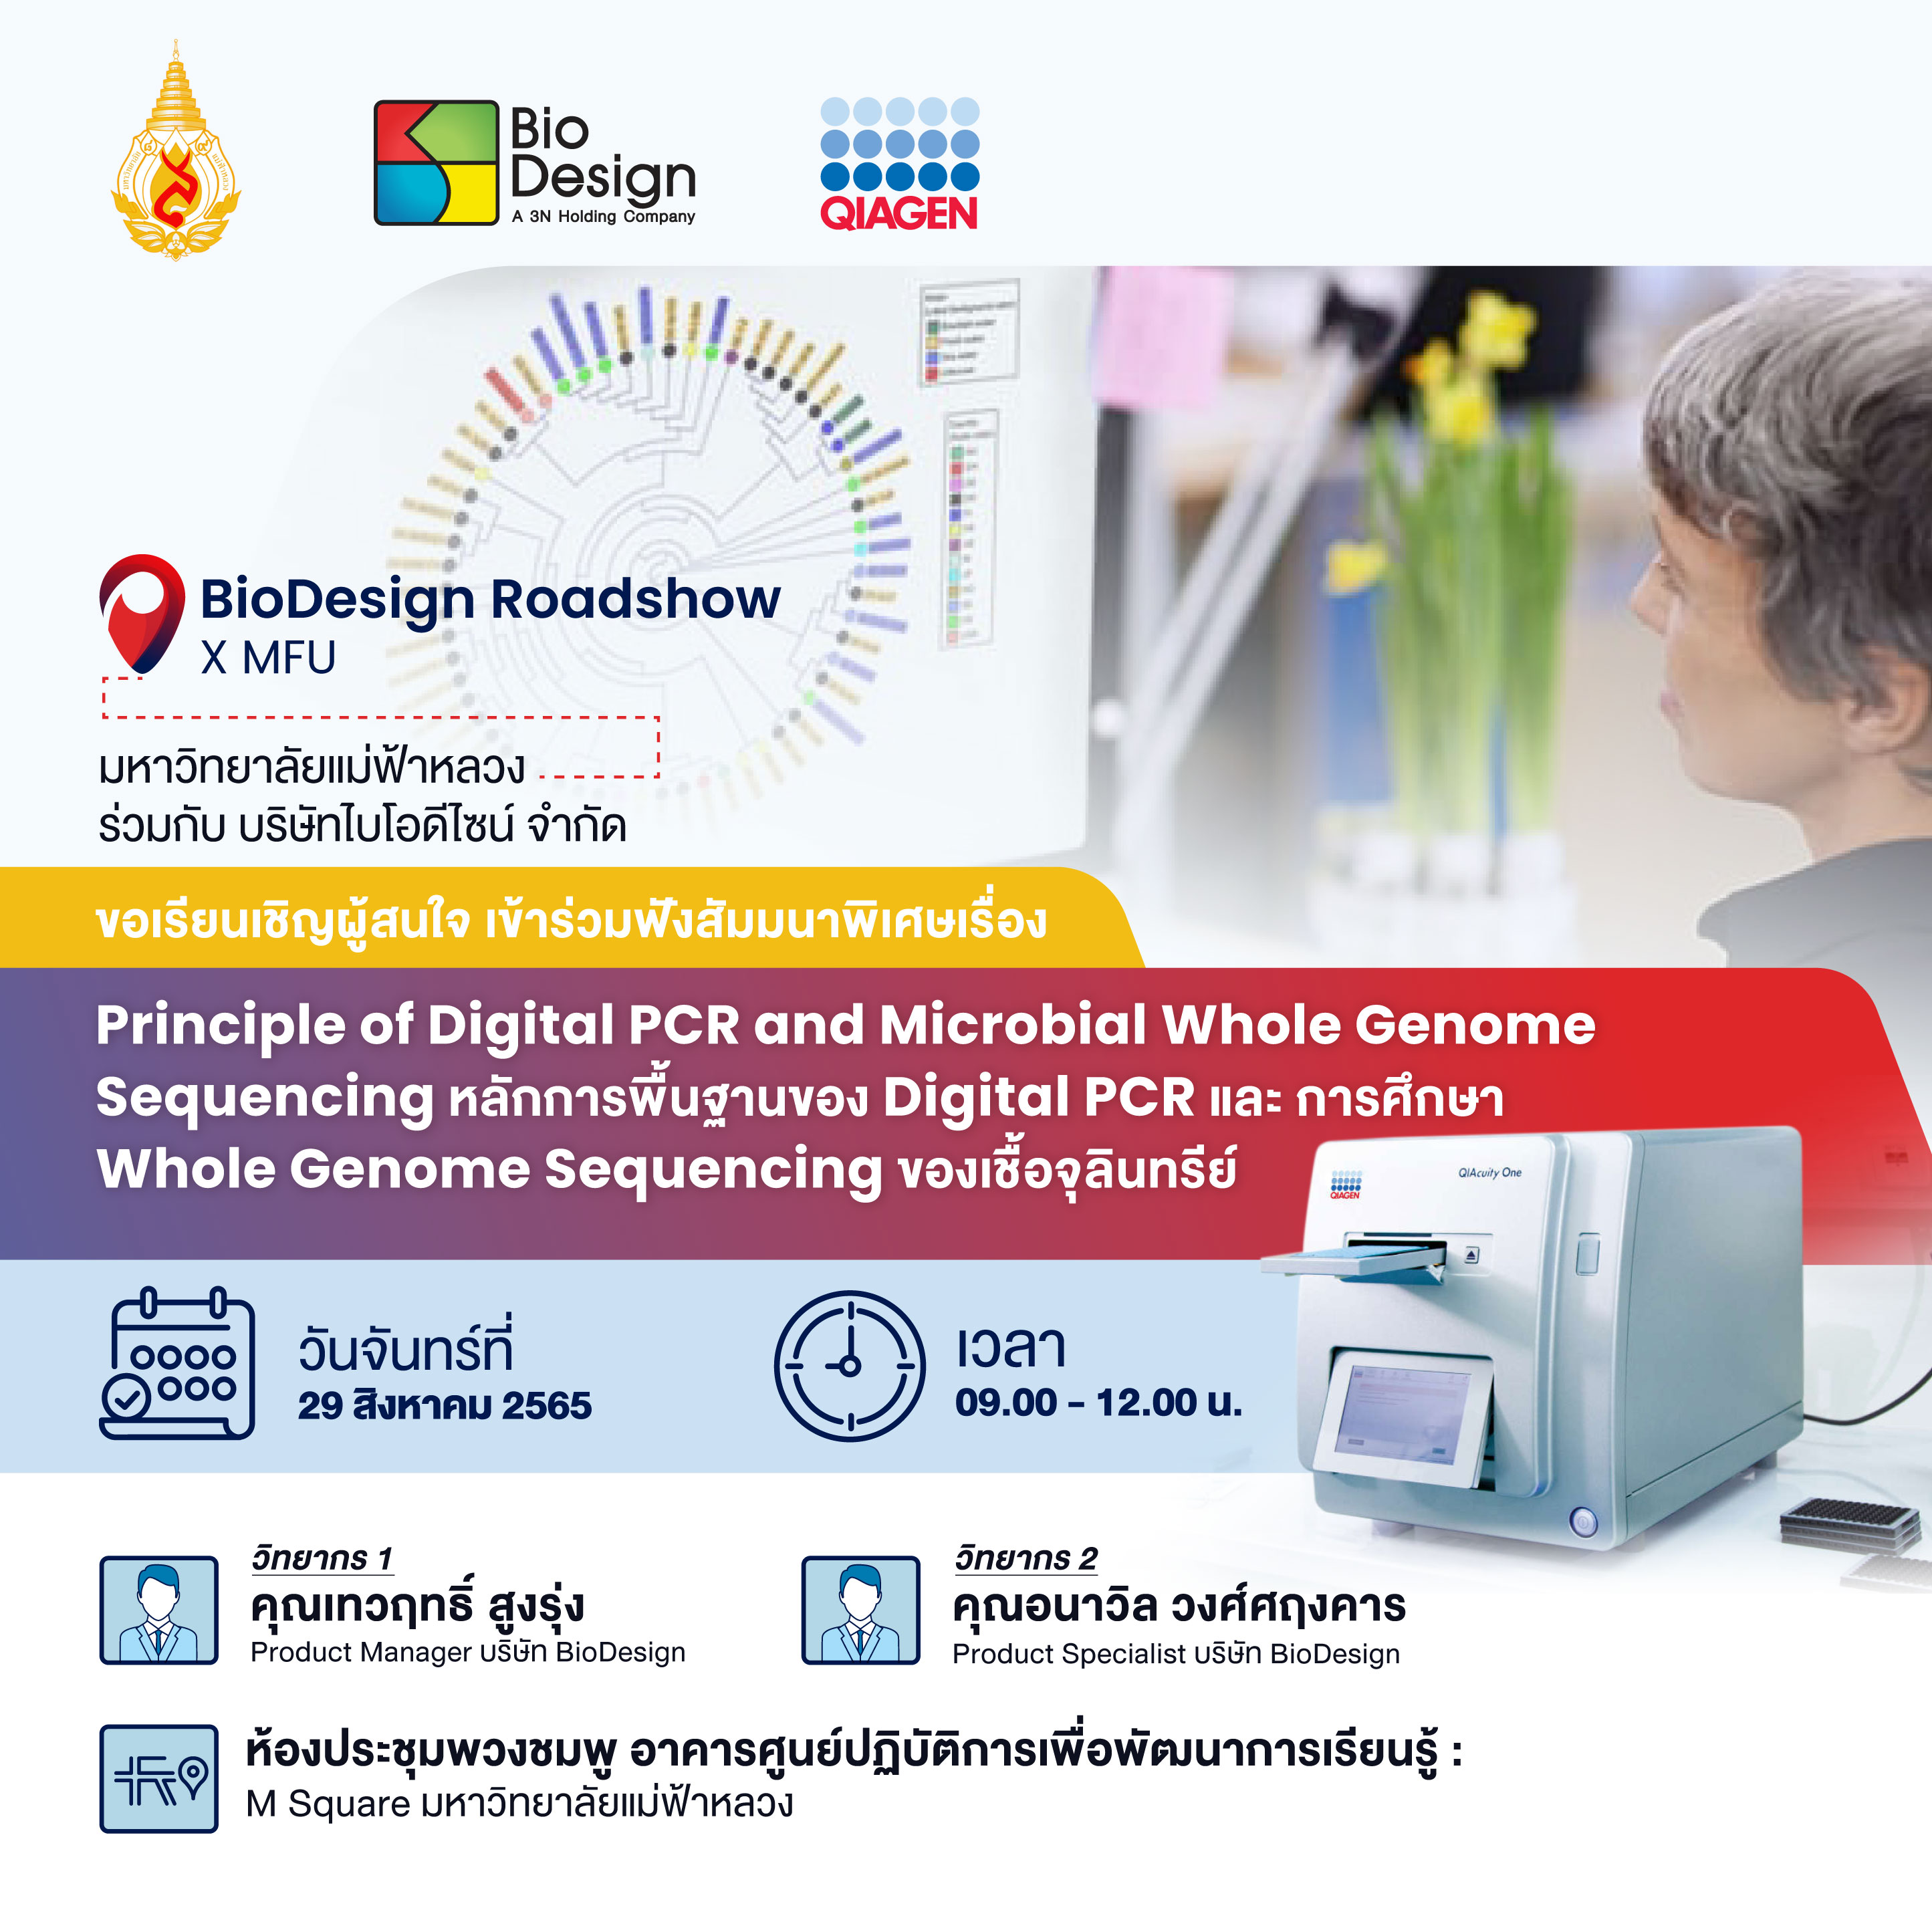     Principle of Digital PCR and Microbial Whole Genome Sequencing